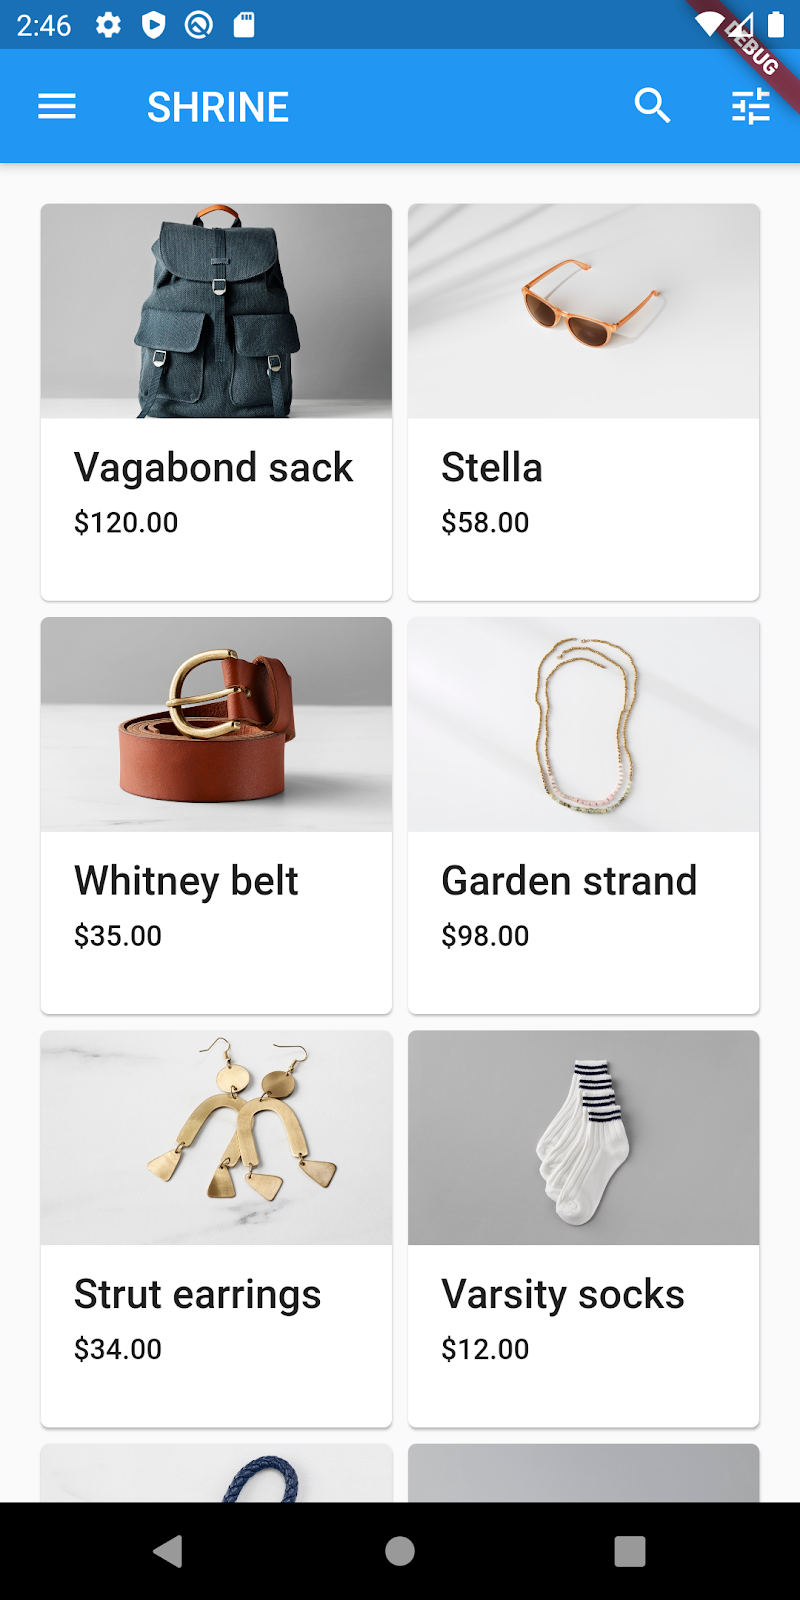 e-commerce app with a top app bar and a grid full of products